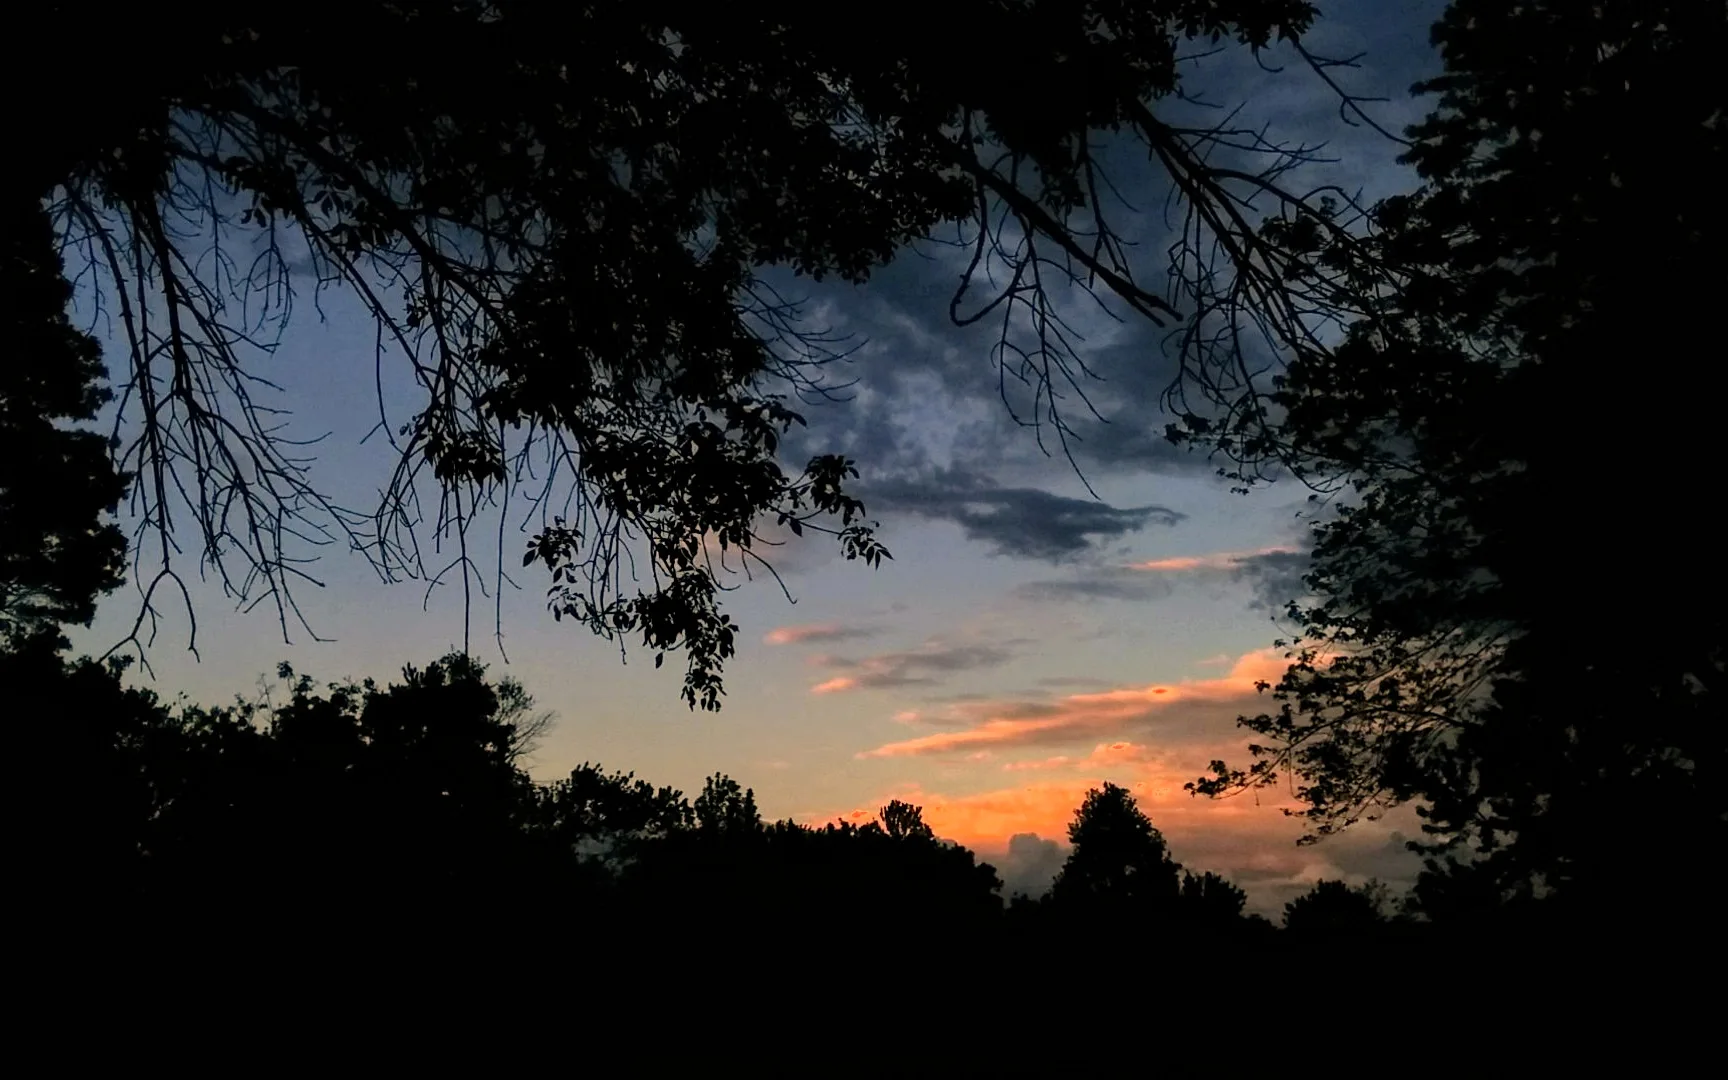 Darkening, blue sky, with dark and crepuscular clouds, at twilight after sunset. Along the edges are silhouettes branches and tops of trees.